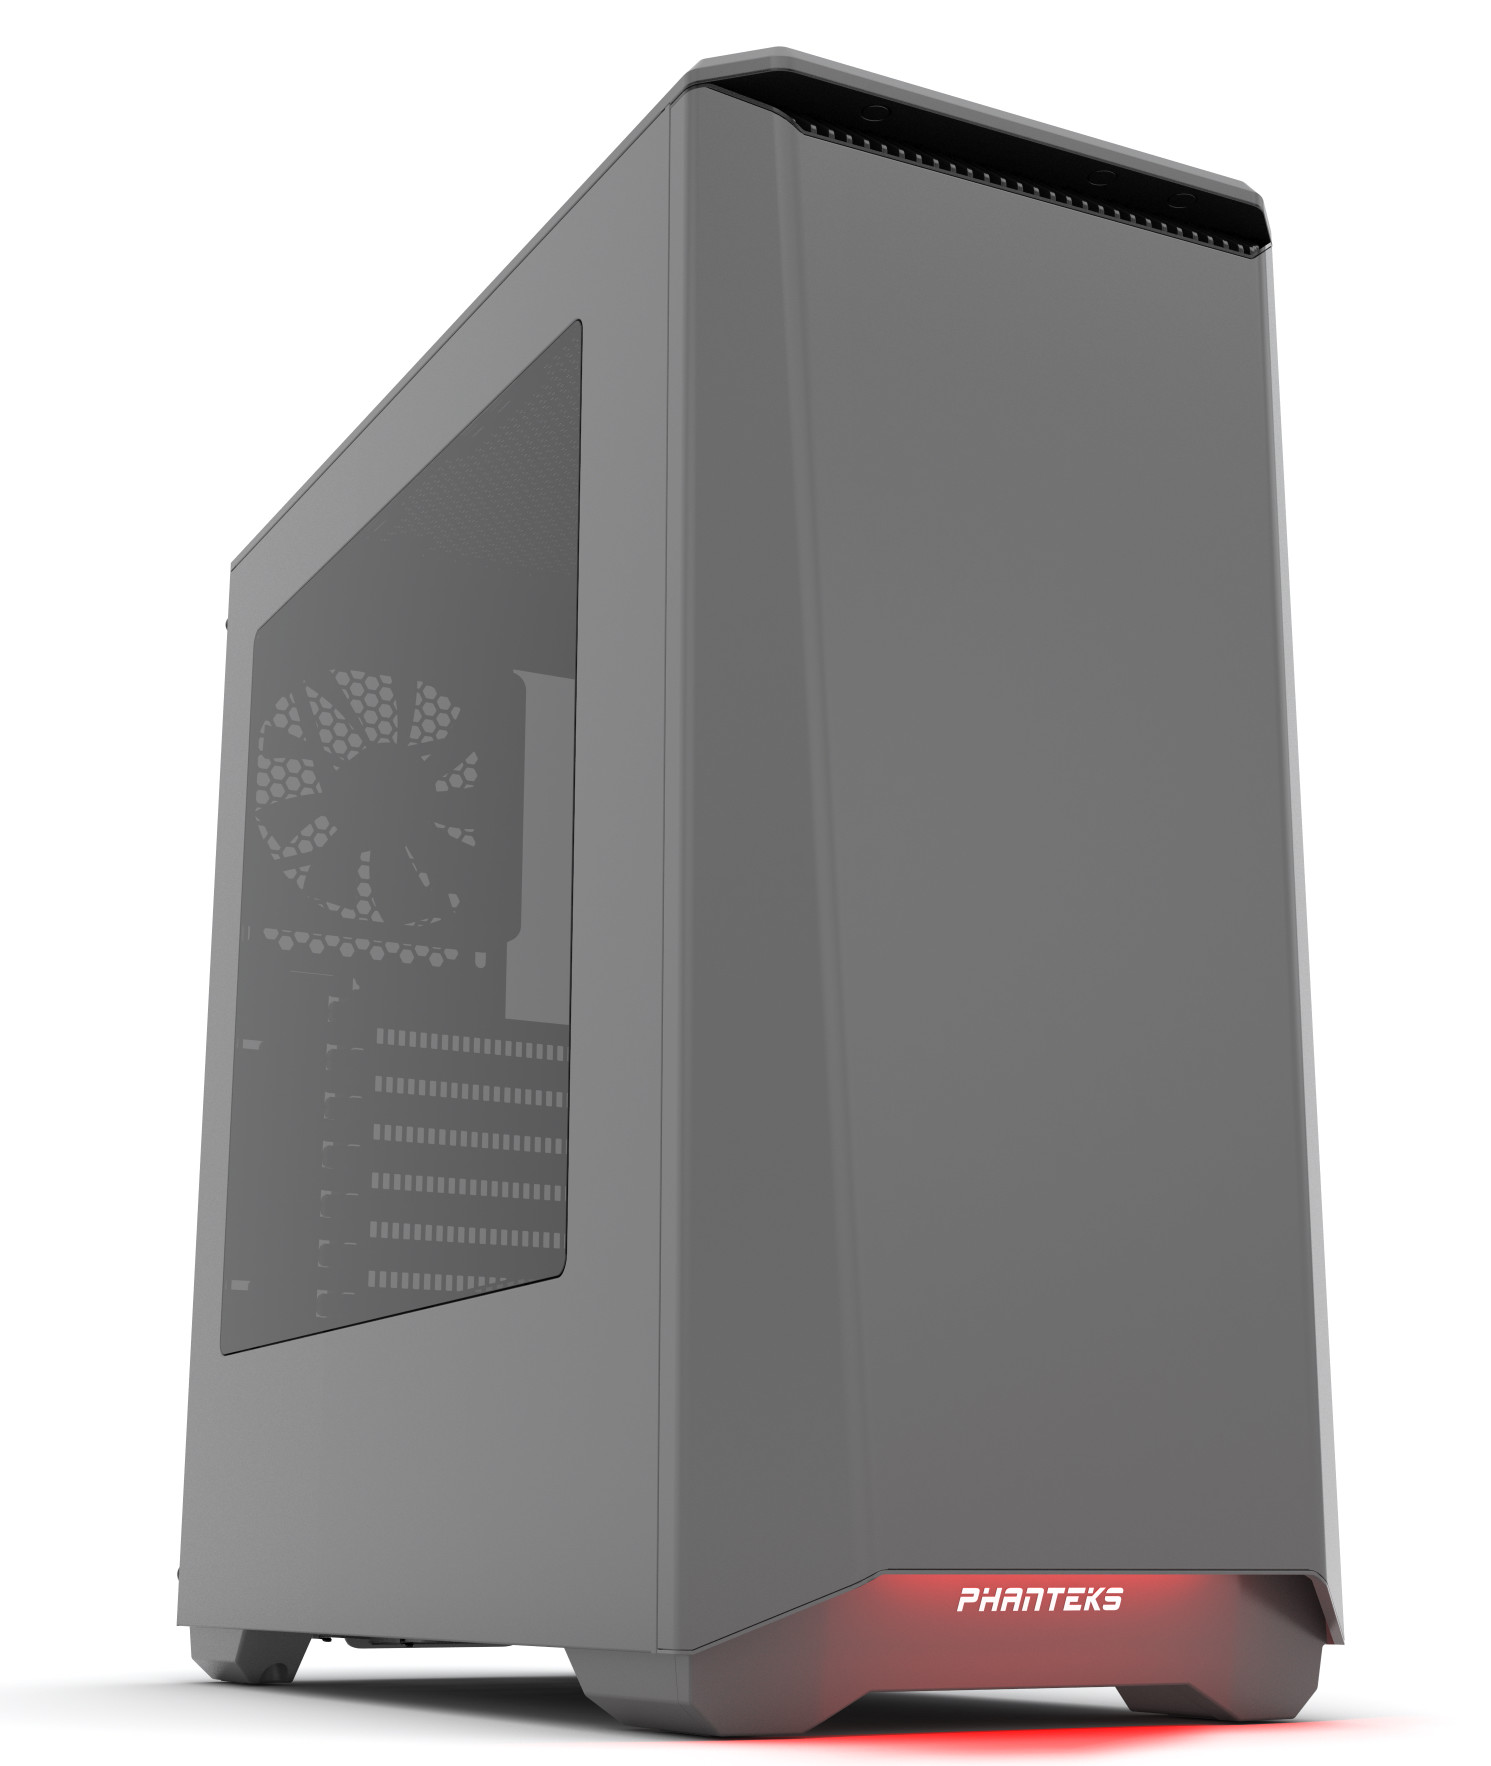 Phanteks Introduces Eclipse P400 and P400S ATX Chassis